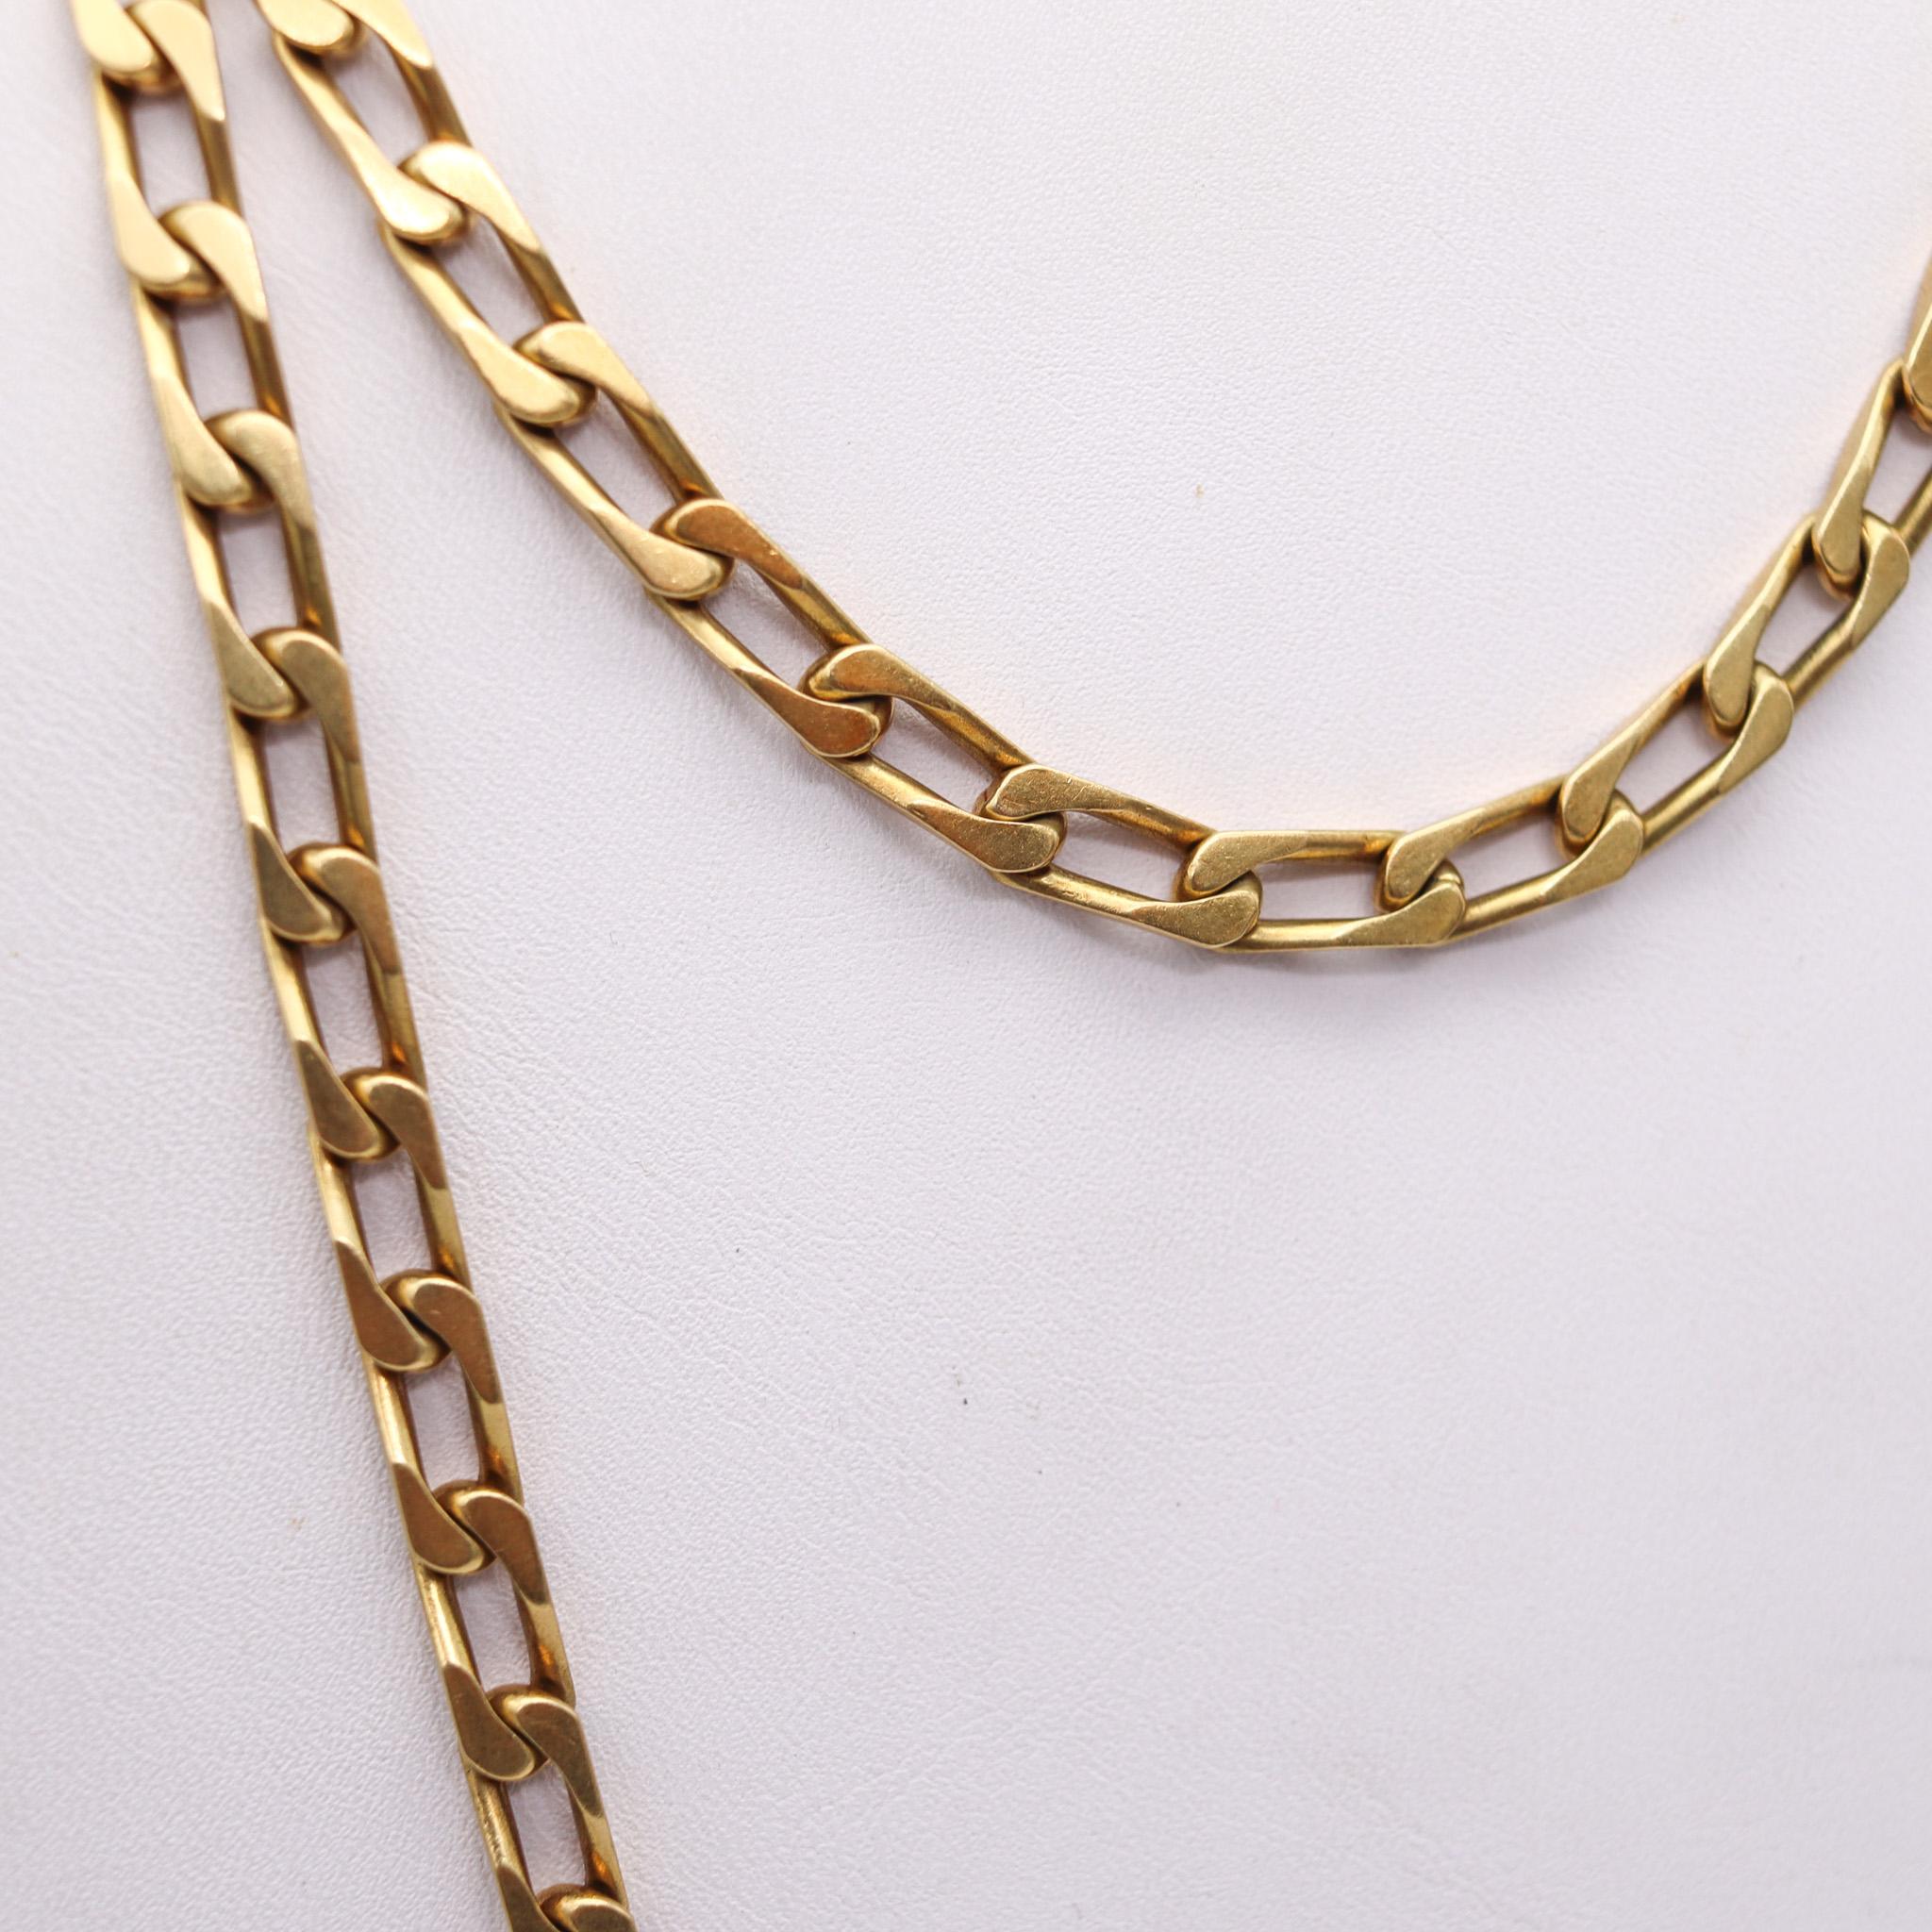 An Italian modernist chain 

A beautiful modernist chain, created in Italy  back in the 1970. This vintage long chain has been crafted with eighty-five links made up in solid yellow gold of 18 karats with polished finish. It is fitted with a